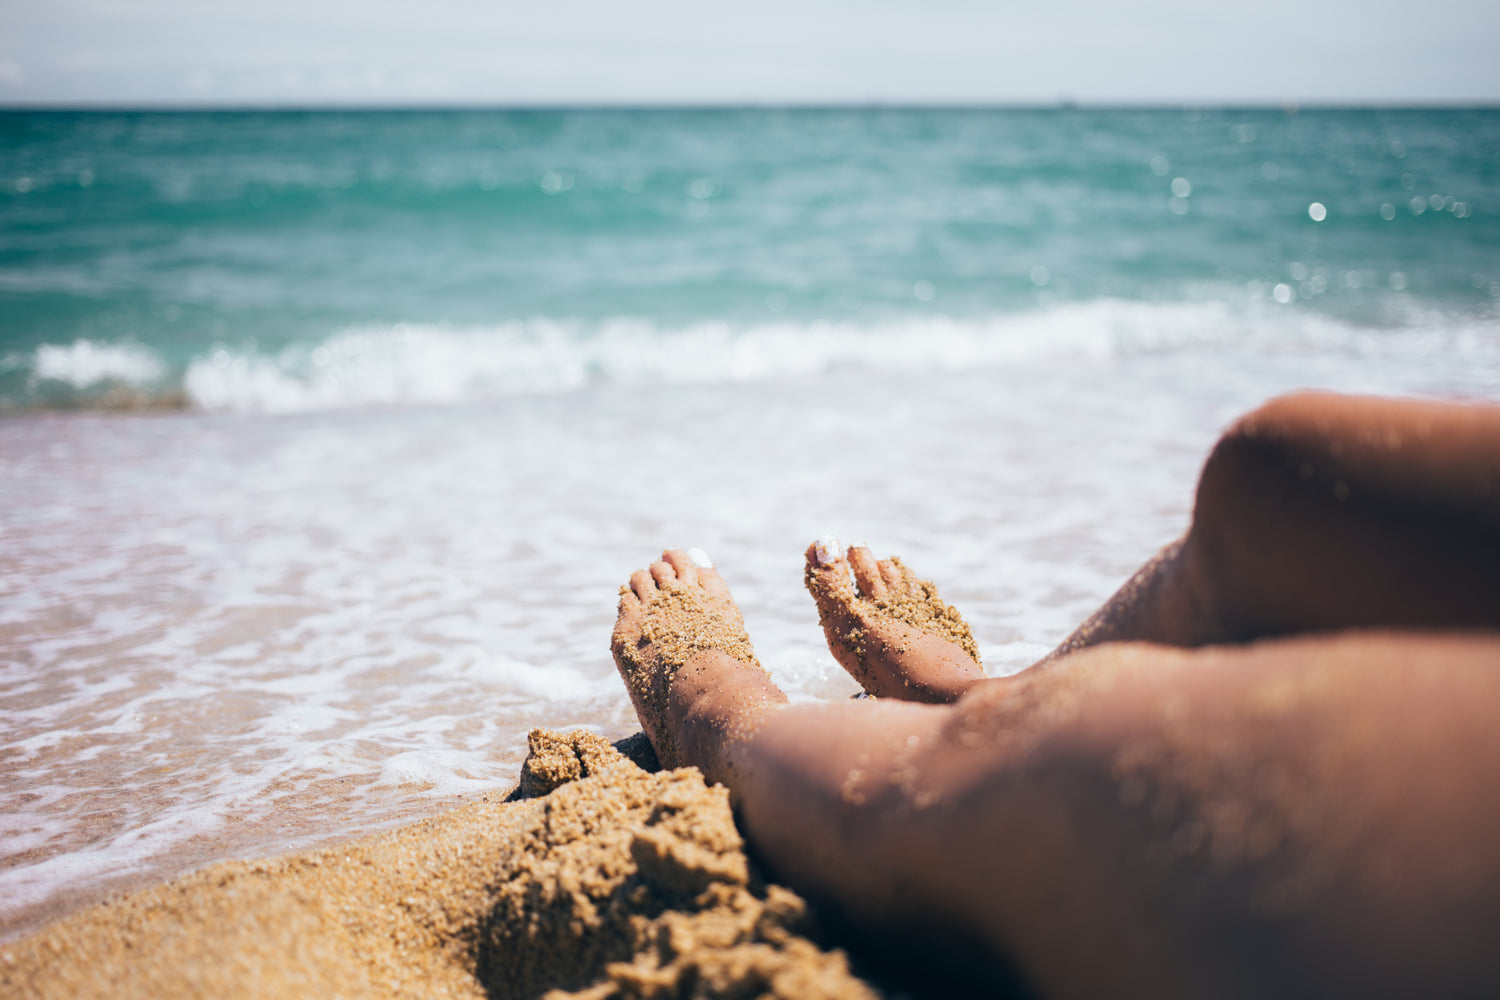 Image of person's feet in the sand near the beach